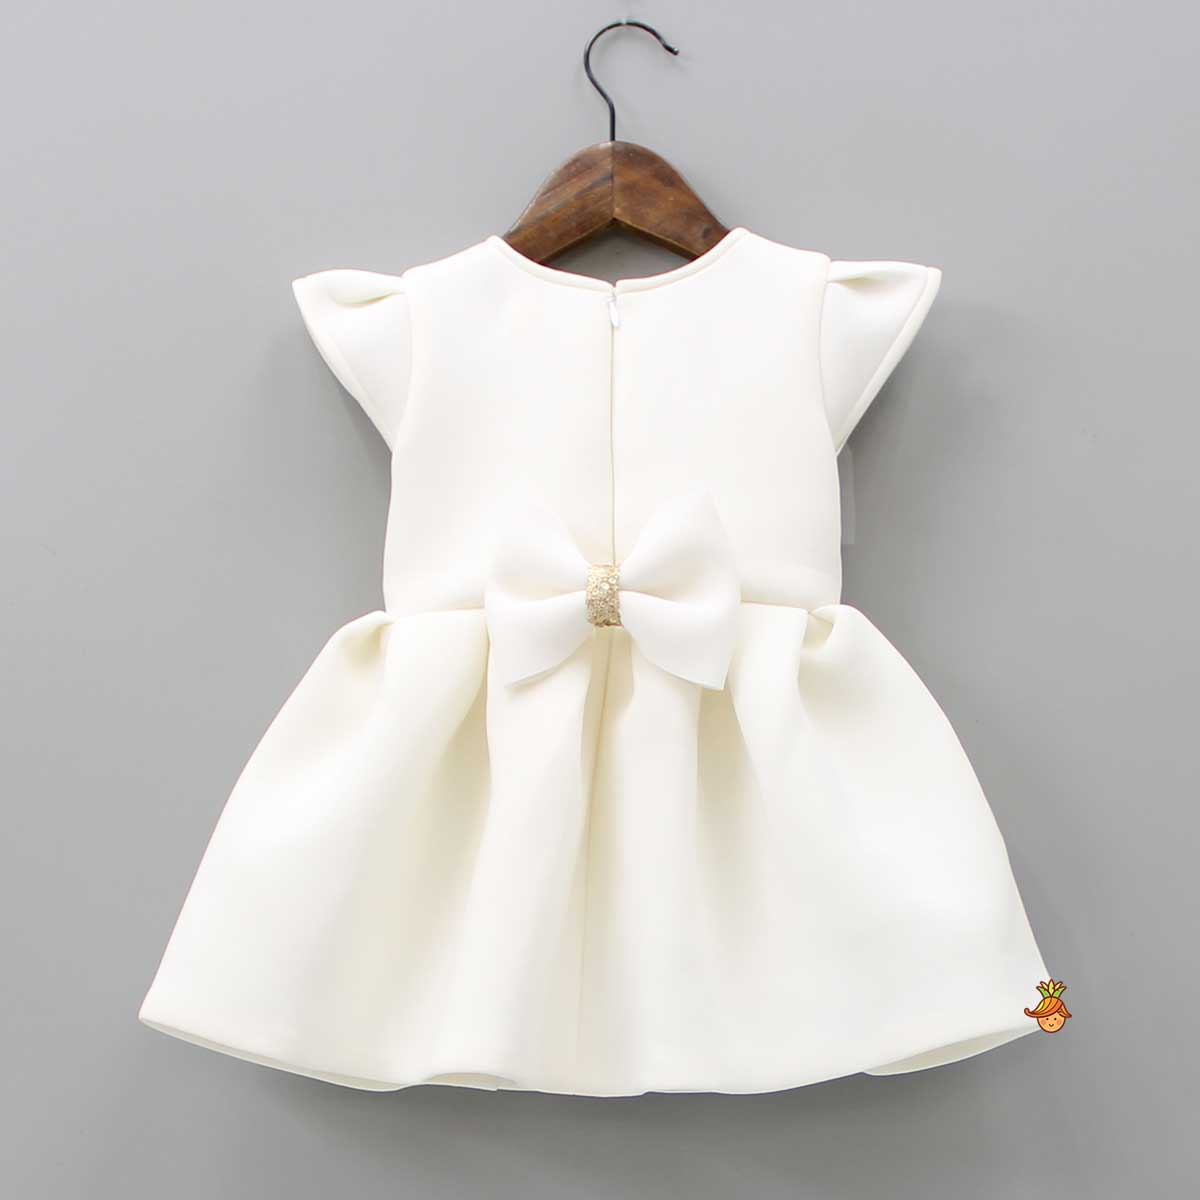 Fancy Off White Scuba Dress With Matching Bow Head Band